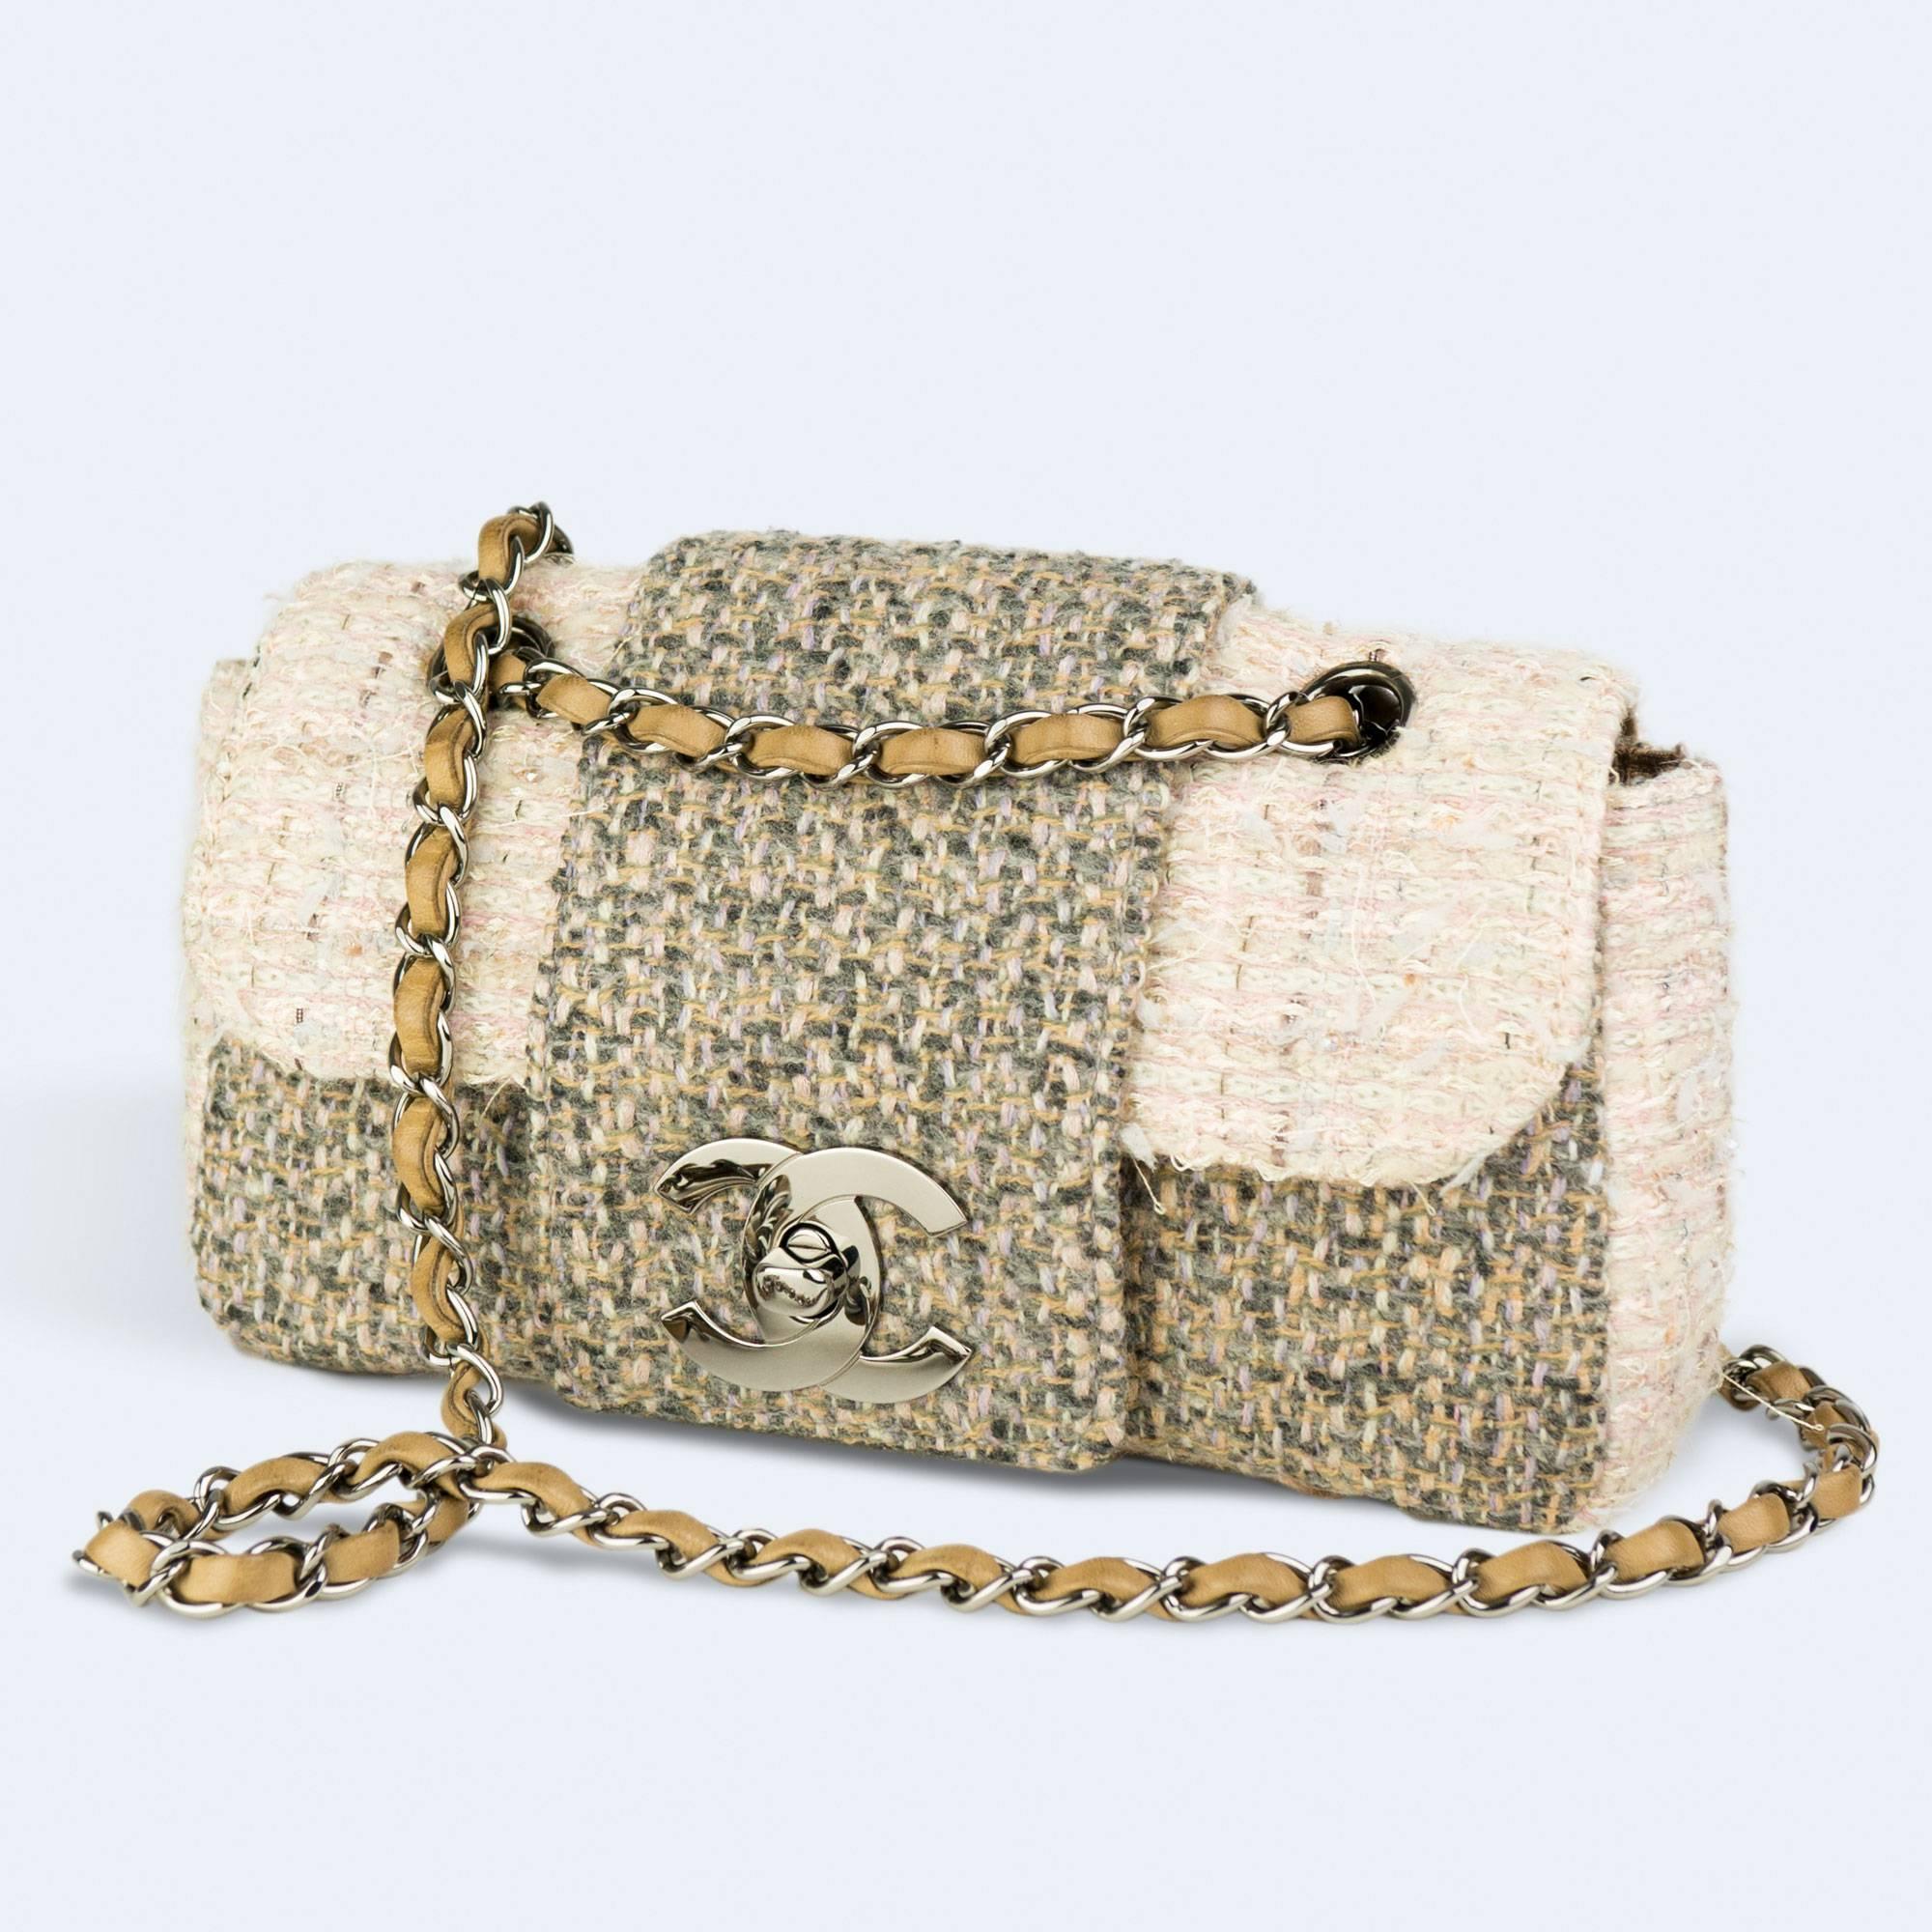 Chanel small cream and grey and multi color tweed with large CC logo and interlocking clasp

2004  {VINTAGE 17 Years}
Antique silver hardware
Interwoven chain
Interior center pocket
Interior brown lambskin lining on flap
Interior brown nylon